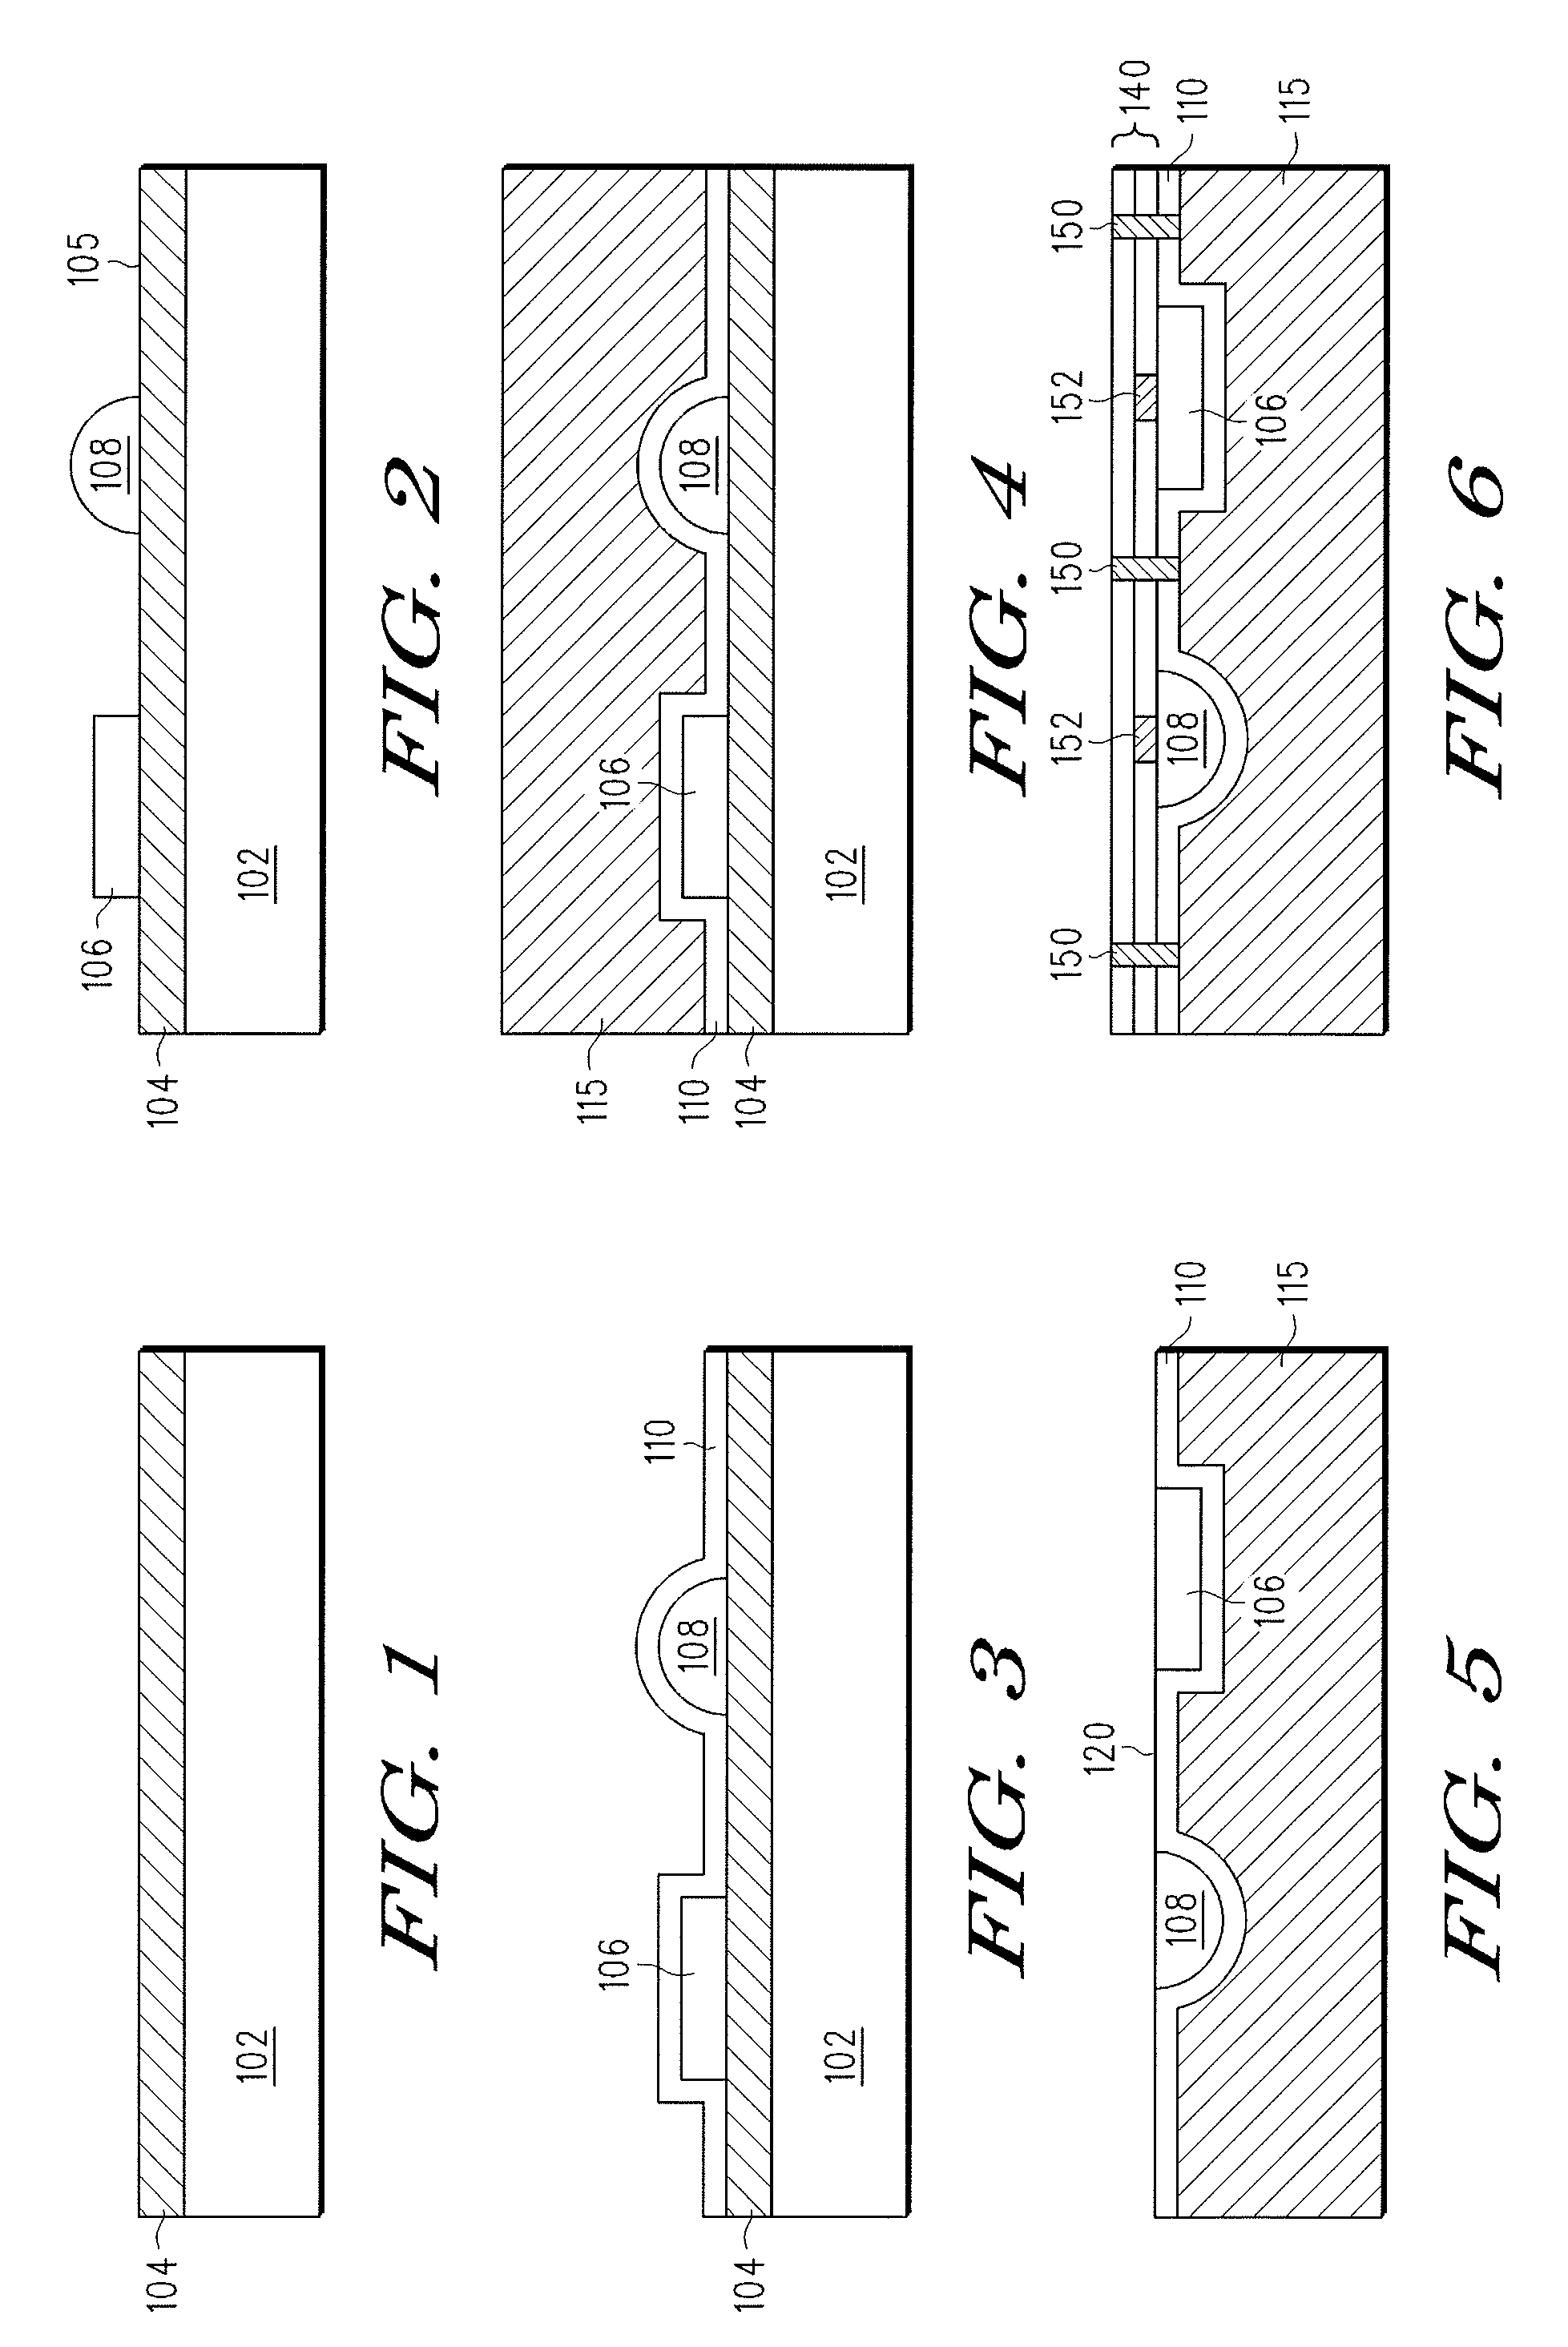 Methods and apparatus for EMI shielding in multi-chip modules